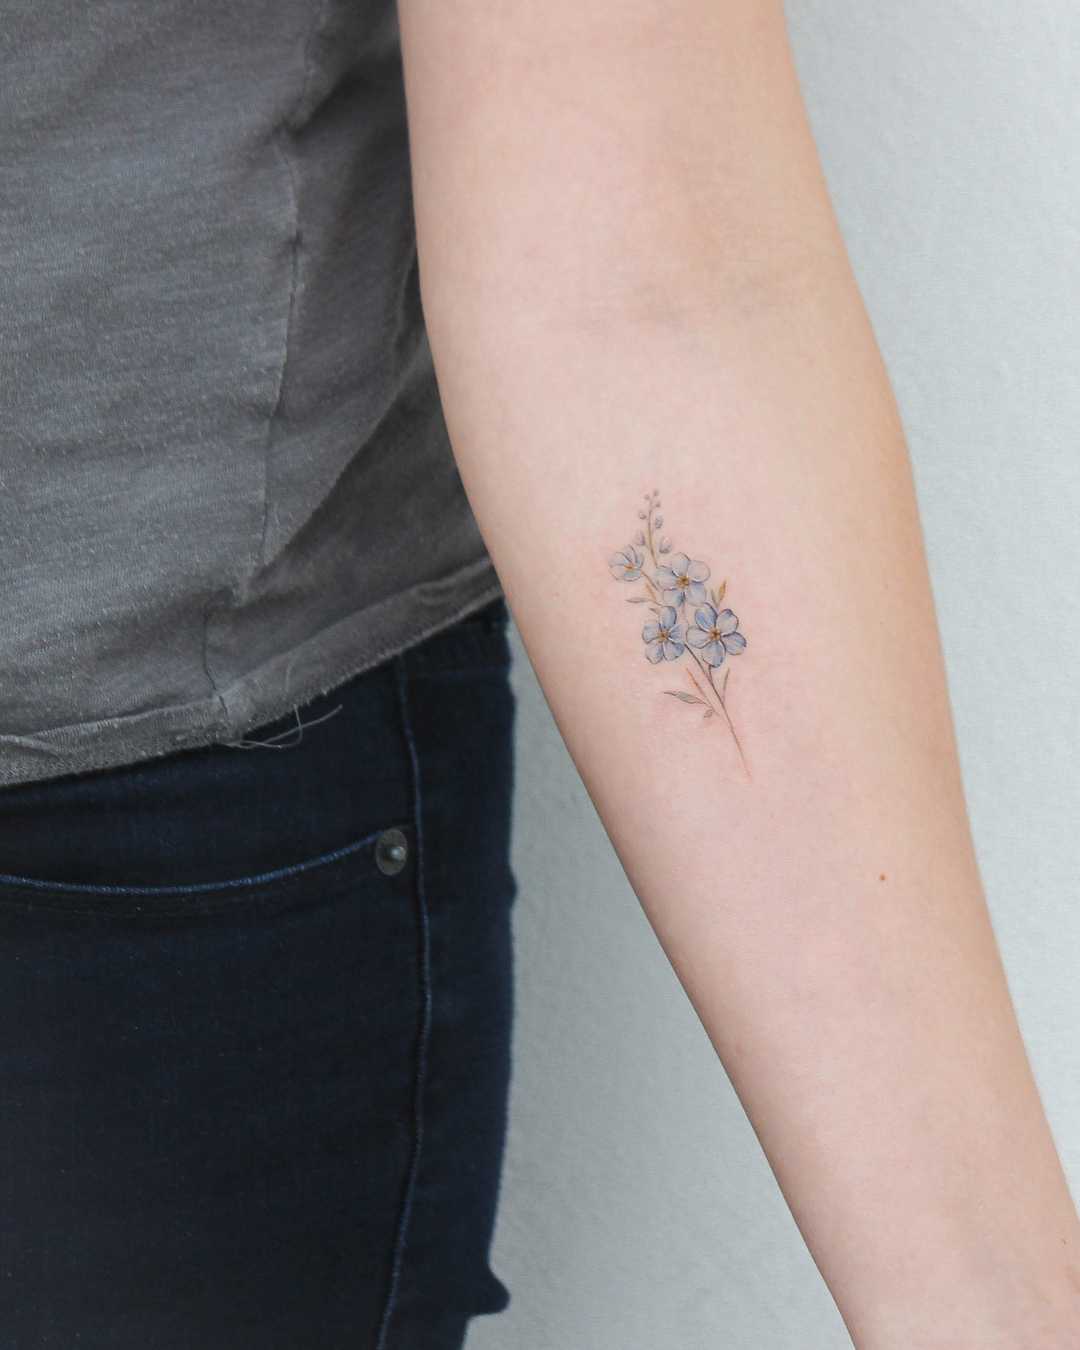 Little Forget-me-not tattoo on the forearm